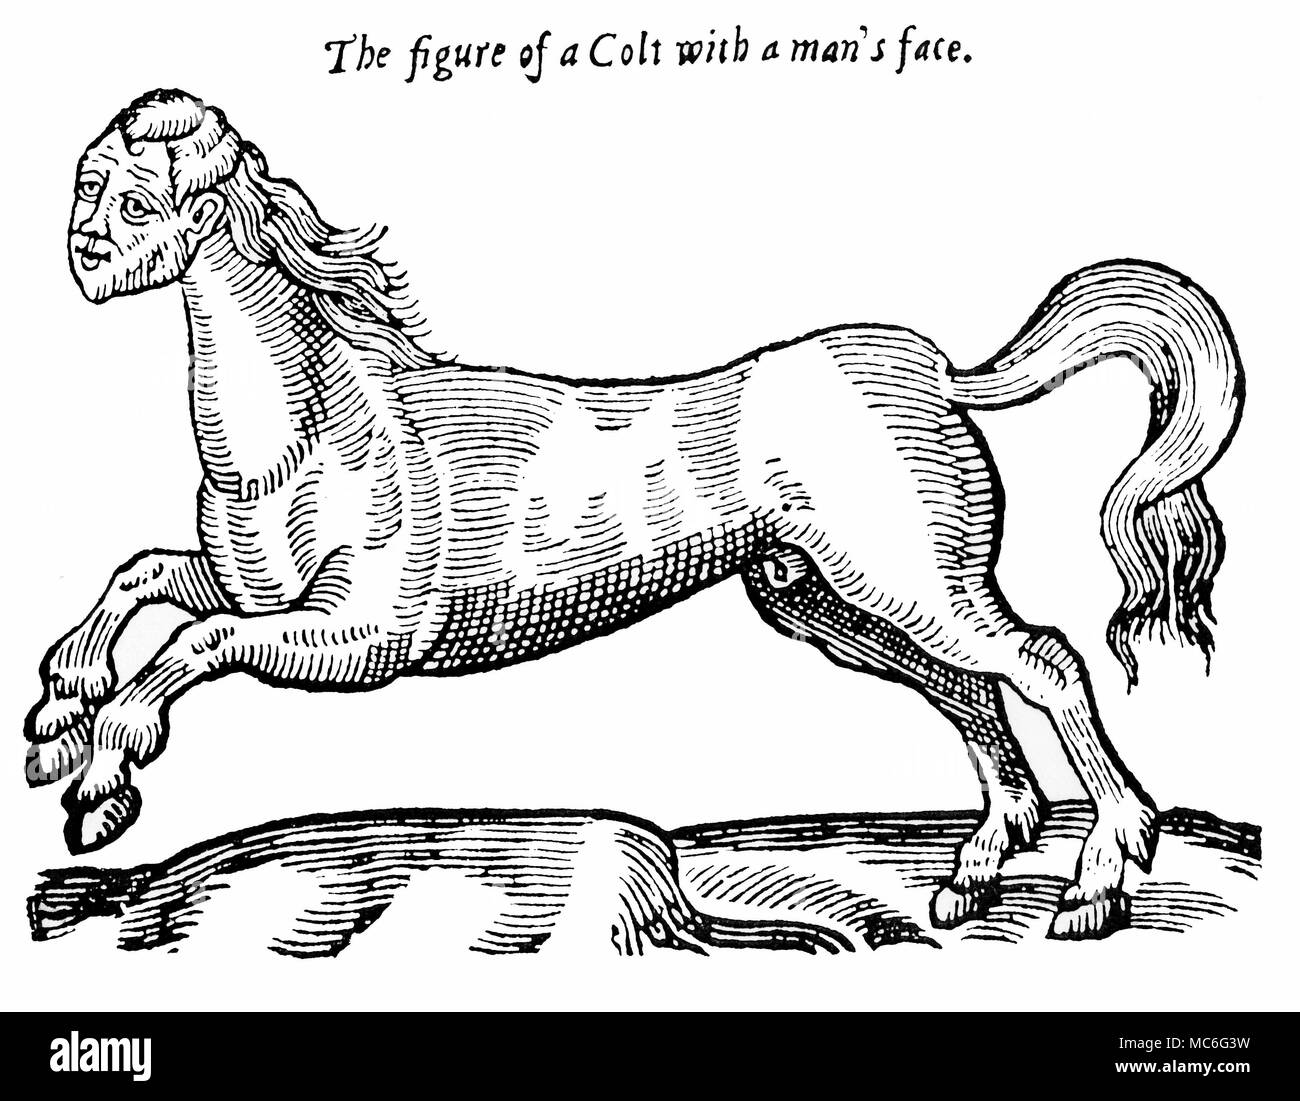 MONSTERS - HUMAN-FACED HORSE Human faced colt monster, which was seen in Verona, Italy, before the war between Florence and Pisa, in 1254. The image and the story is recorded by Ambroise ParÃš, Des Monstres, 1584, (known in English as On Monsters and Marvels) as an example of the sign of the 'Wrath of God'. Stock Photo